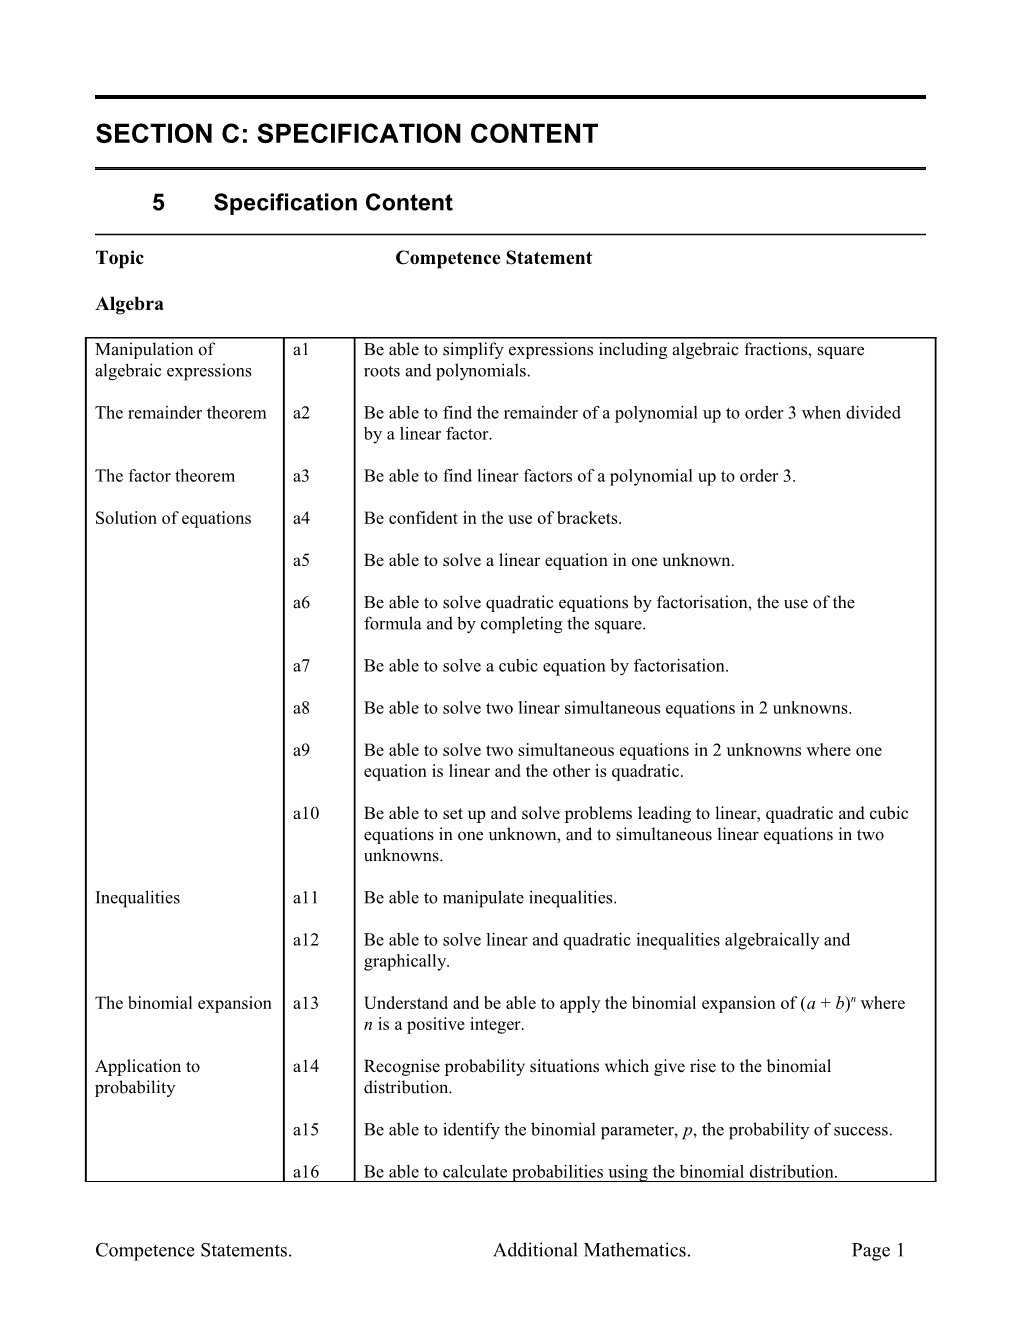 Section C: Specification Content